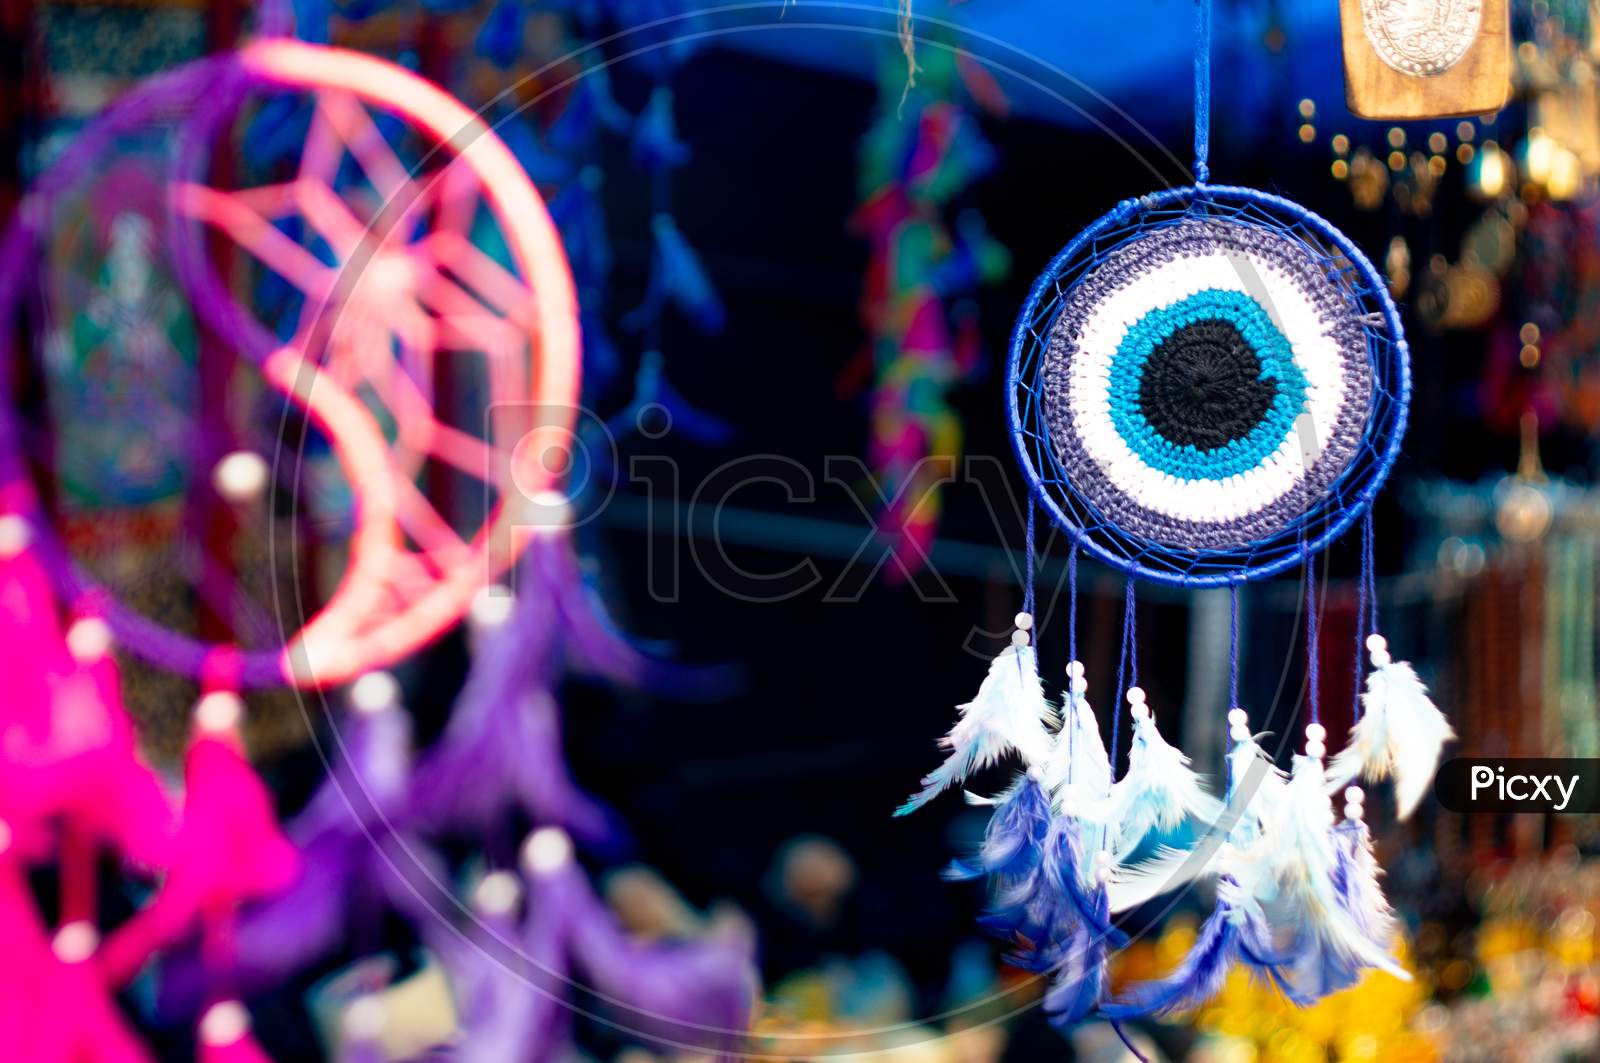 Colorful Dreamcatchers Made Of Feathers And Wispy String Placed In An Open Roadside Shop A Perfect Item For Good Dreams And Happiness